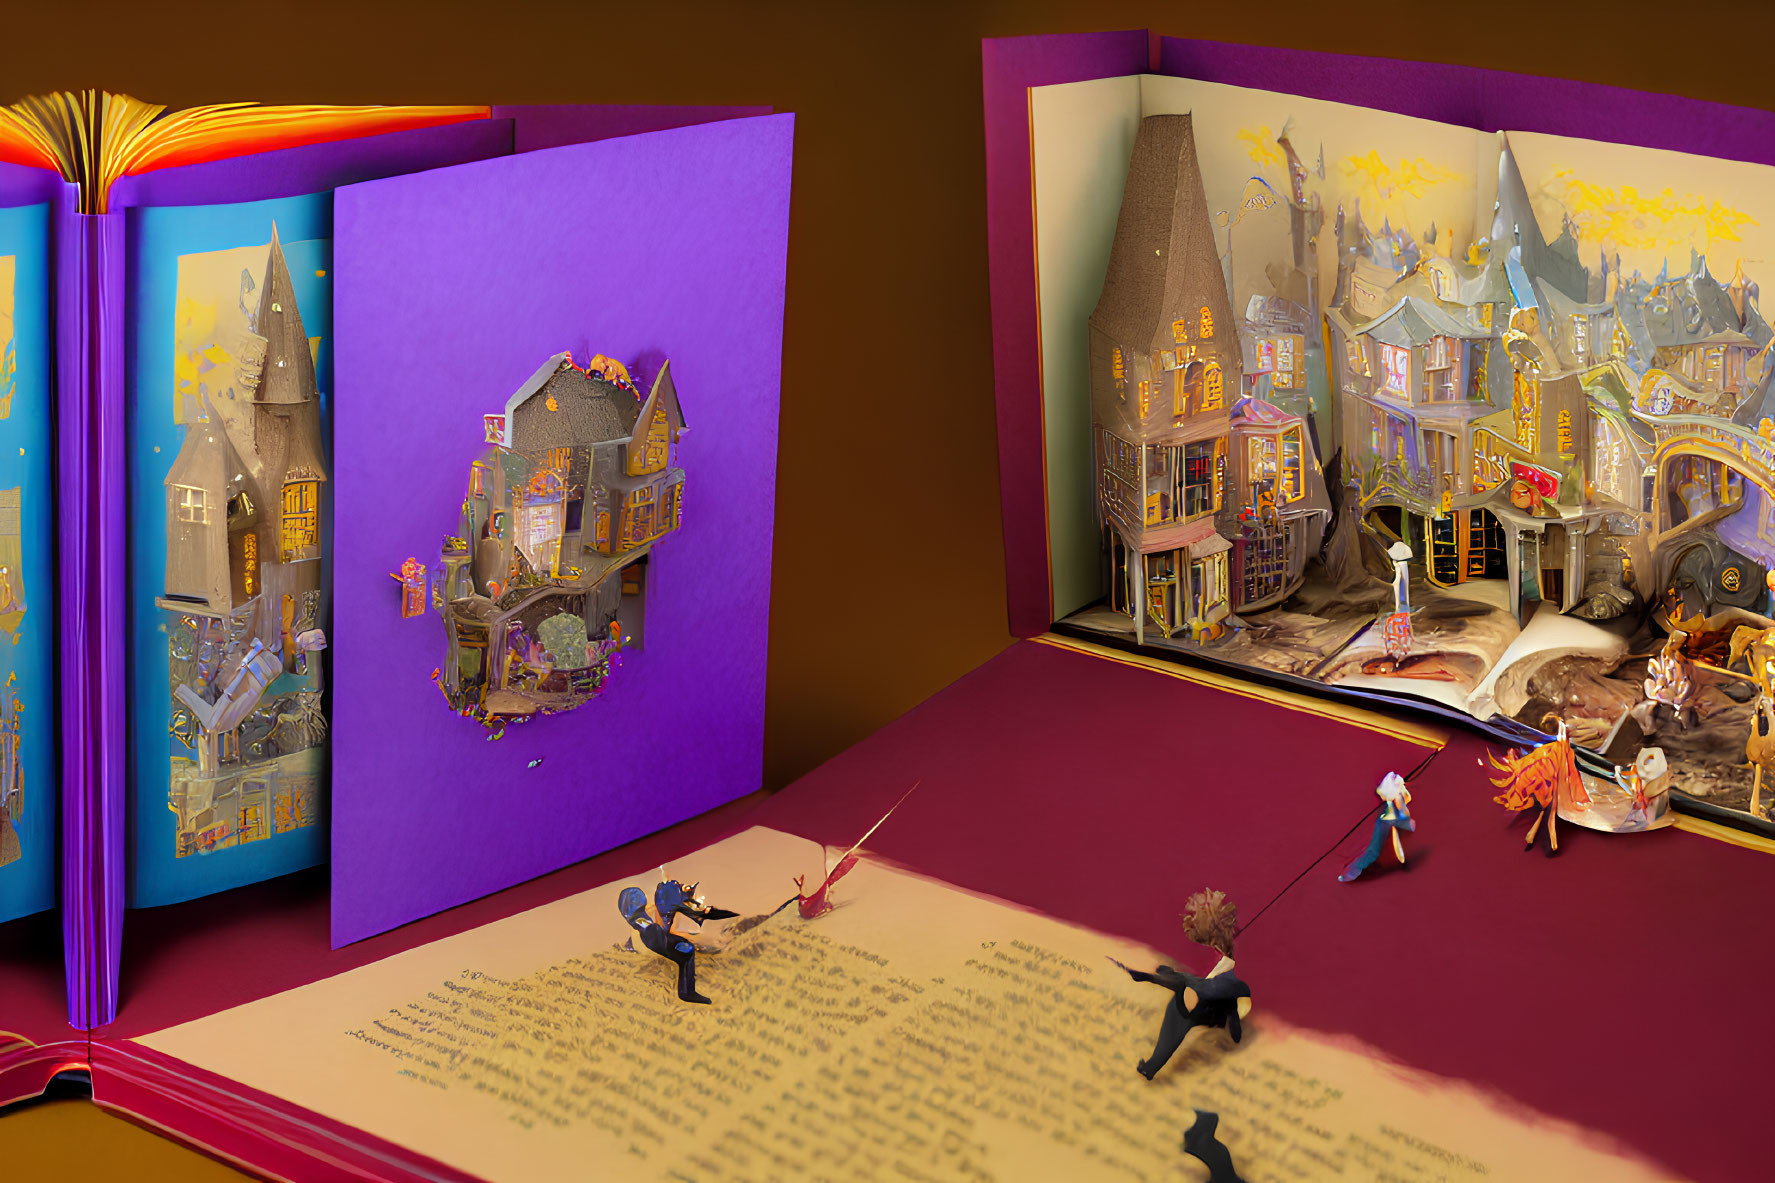 Colorful pop-up book depicts magical scene with whimsical duel